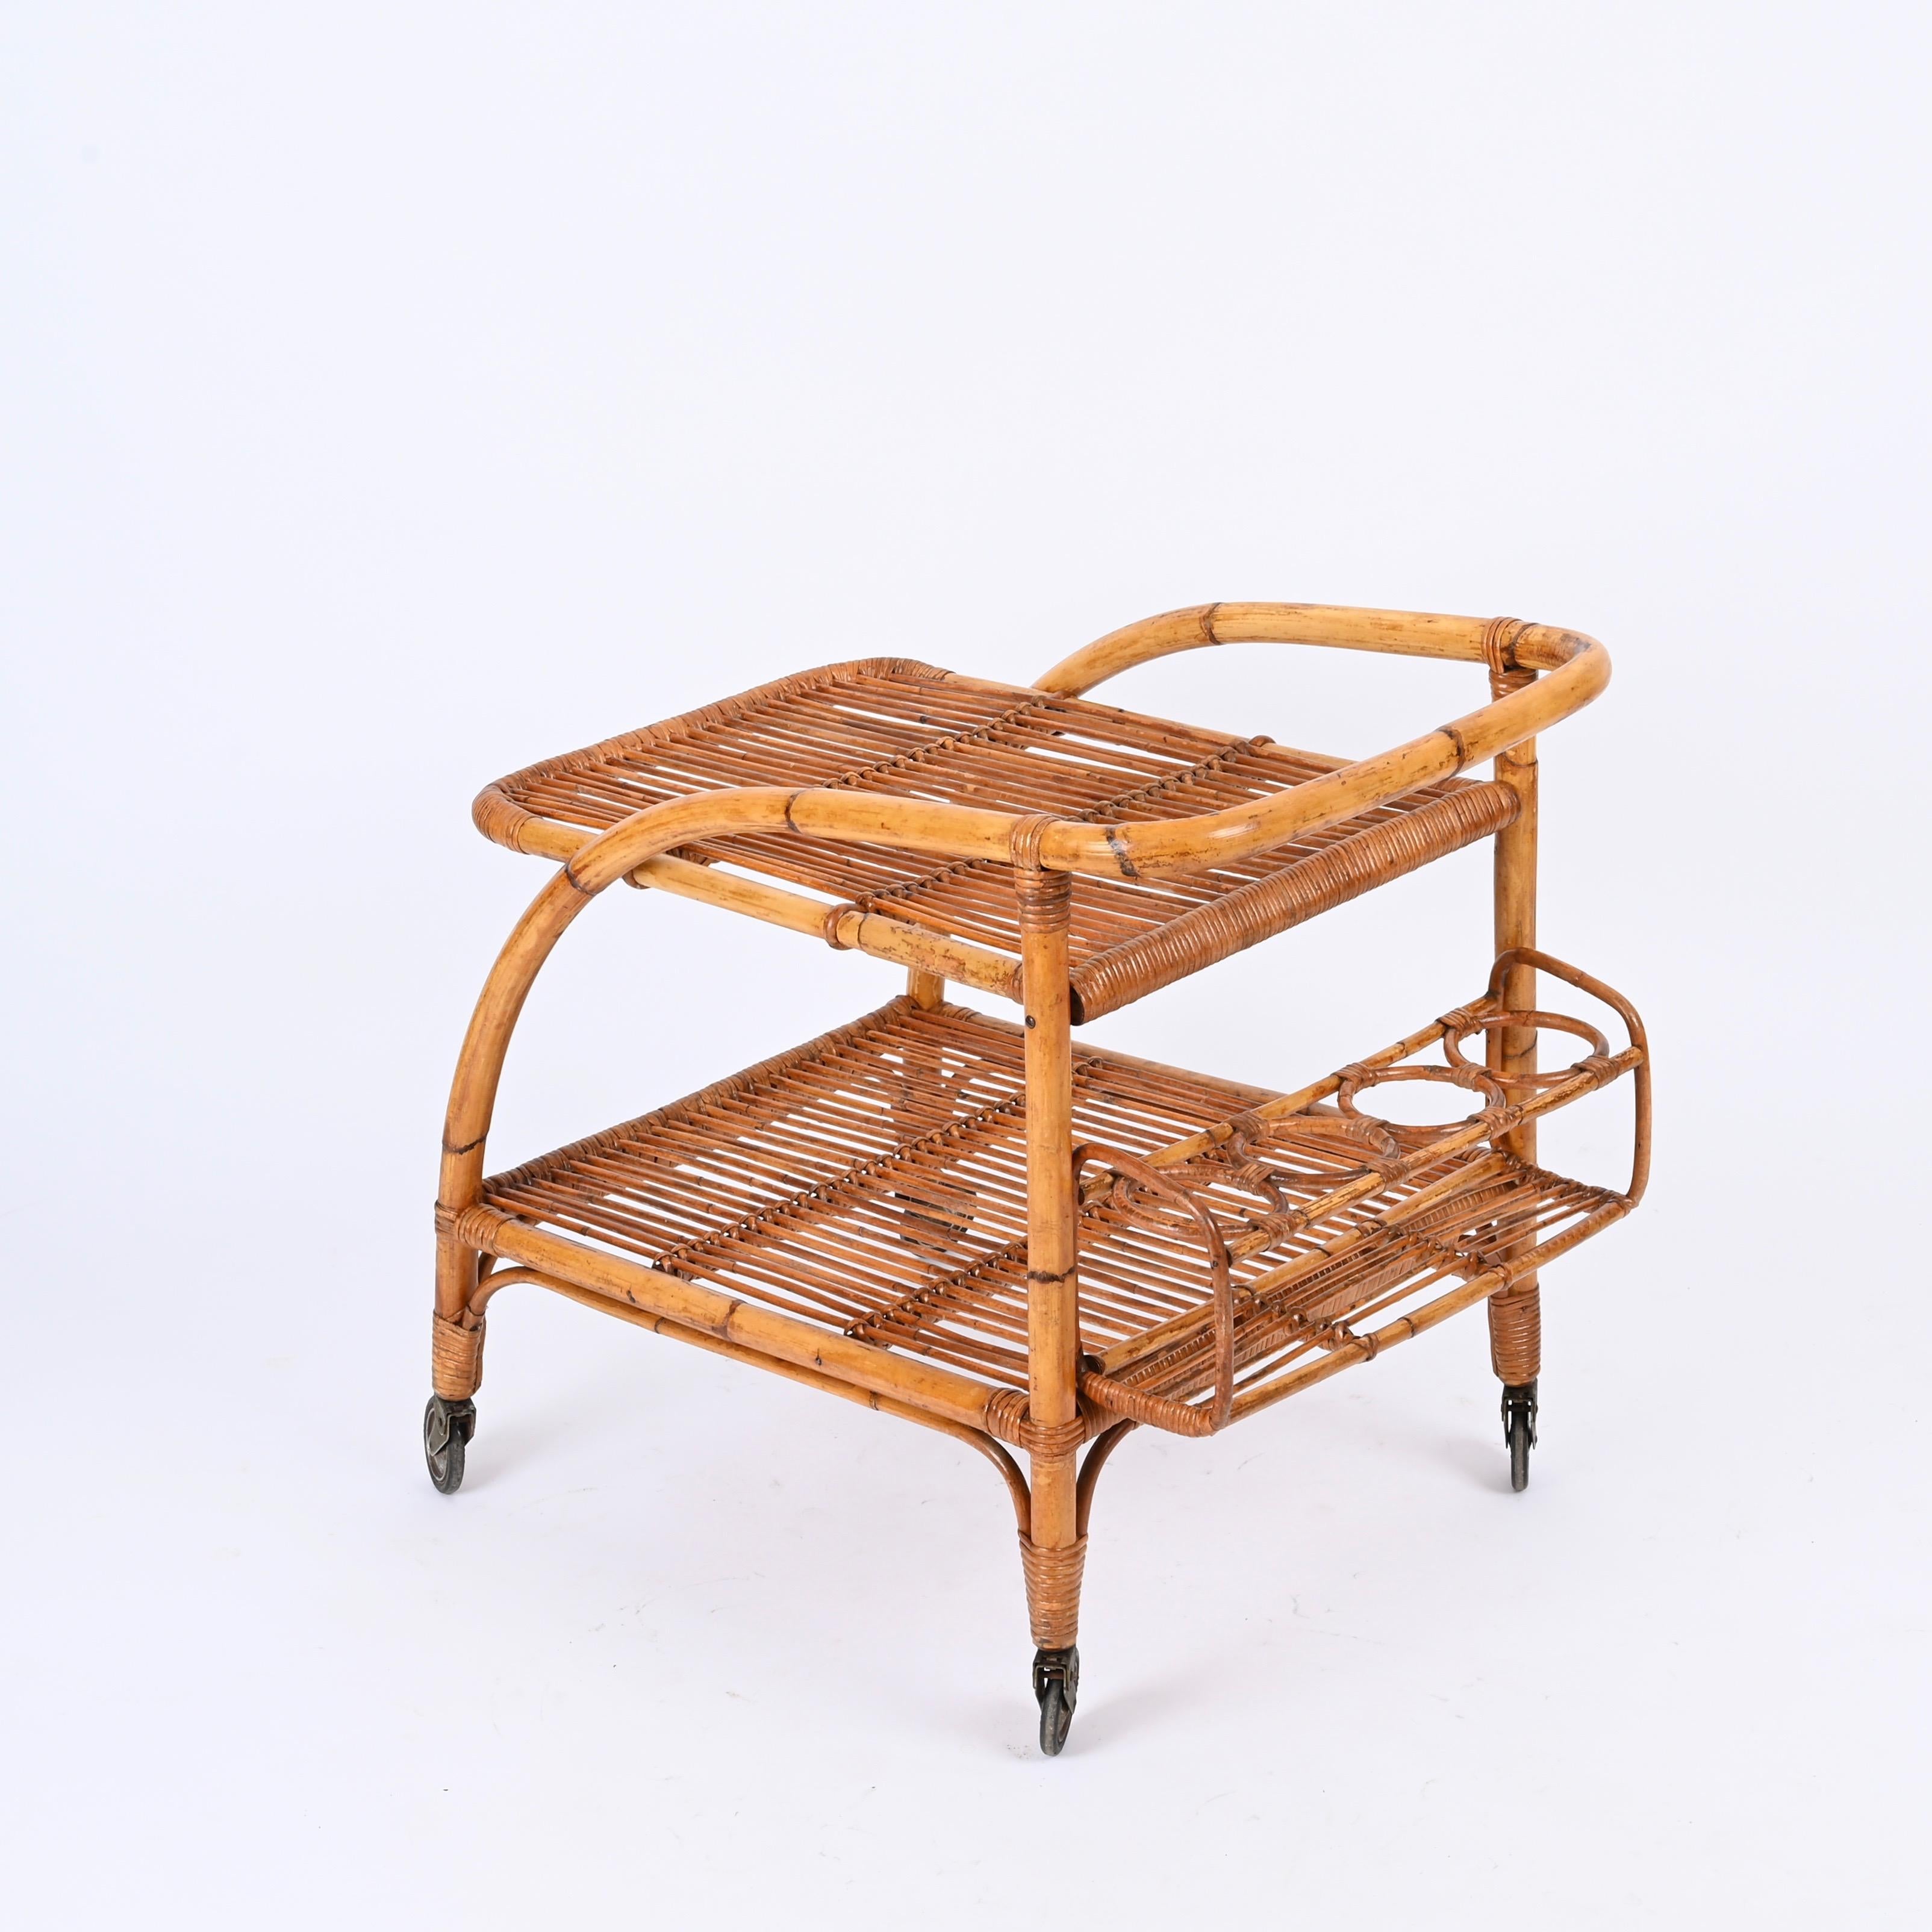 Bamboo Midcentury French Riviera Rattan and Wicker Serving Bar Cart Trolley, Italy 1960 For Sale